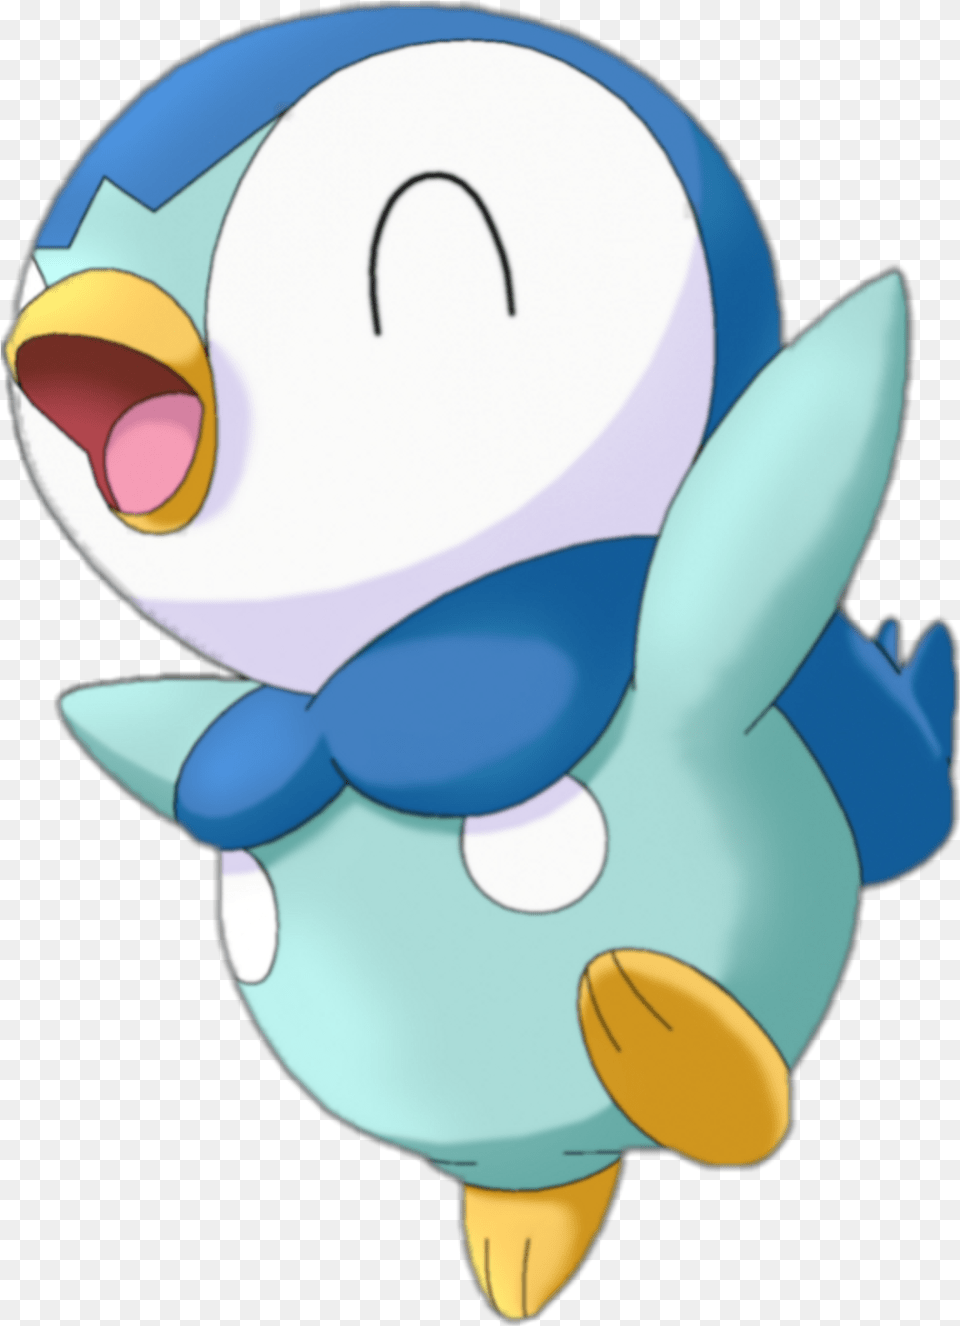 Cute Pokemon Piplup Clipart Single Pokemon All Names, Plush, Toy Free Png Download